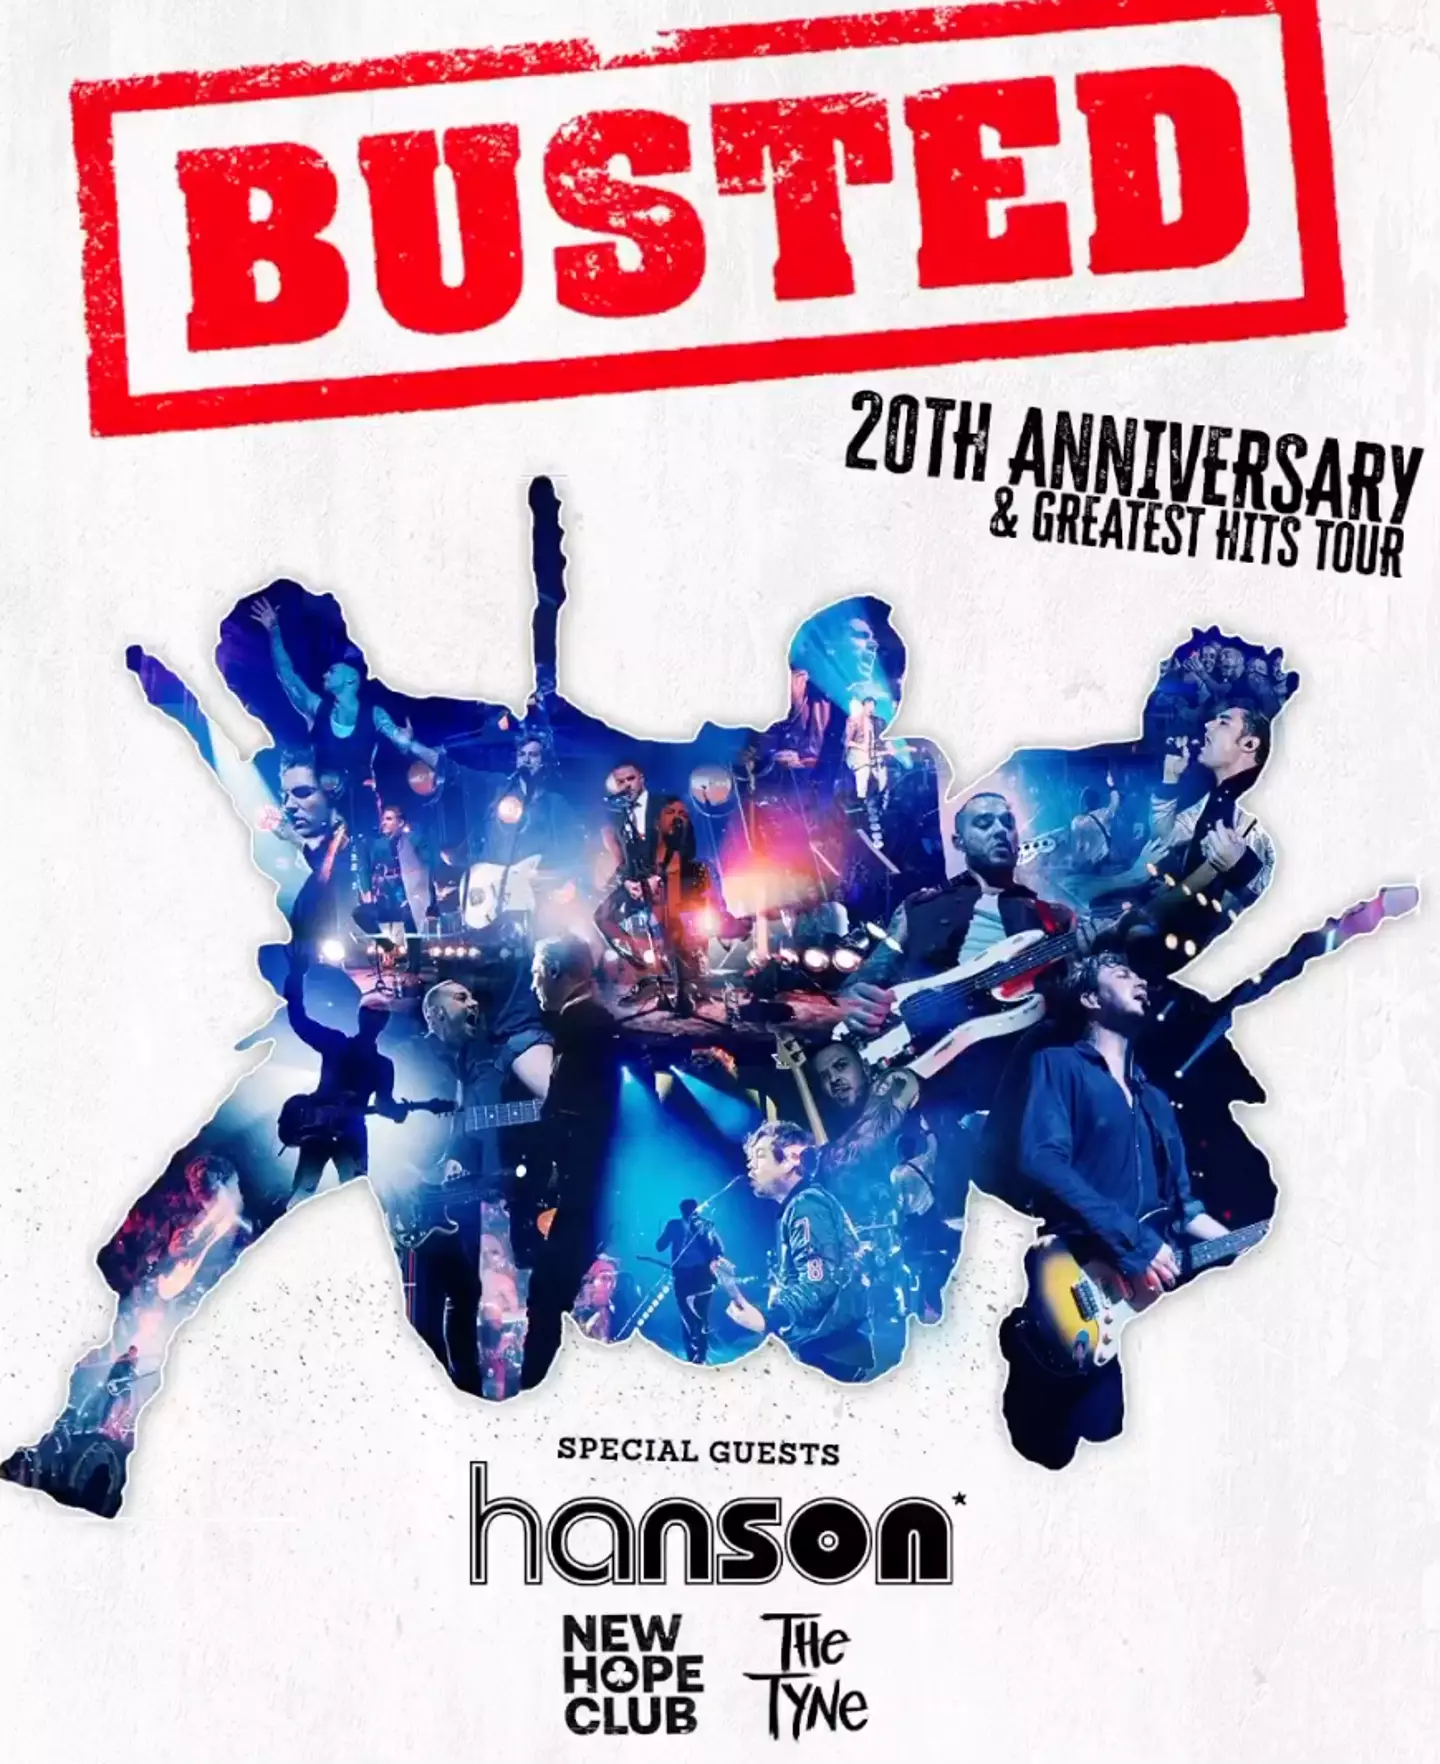 Hanson is set to join Busted on the tour.